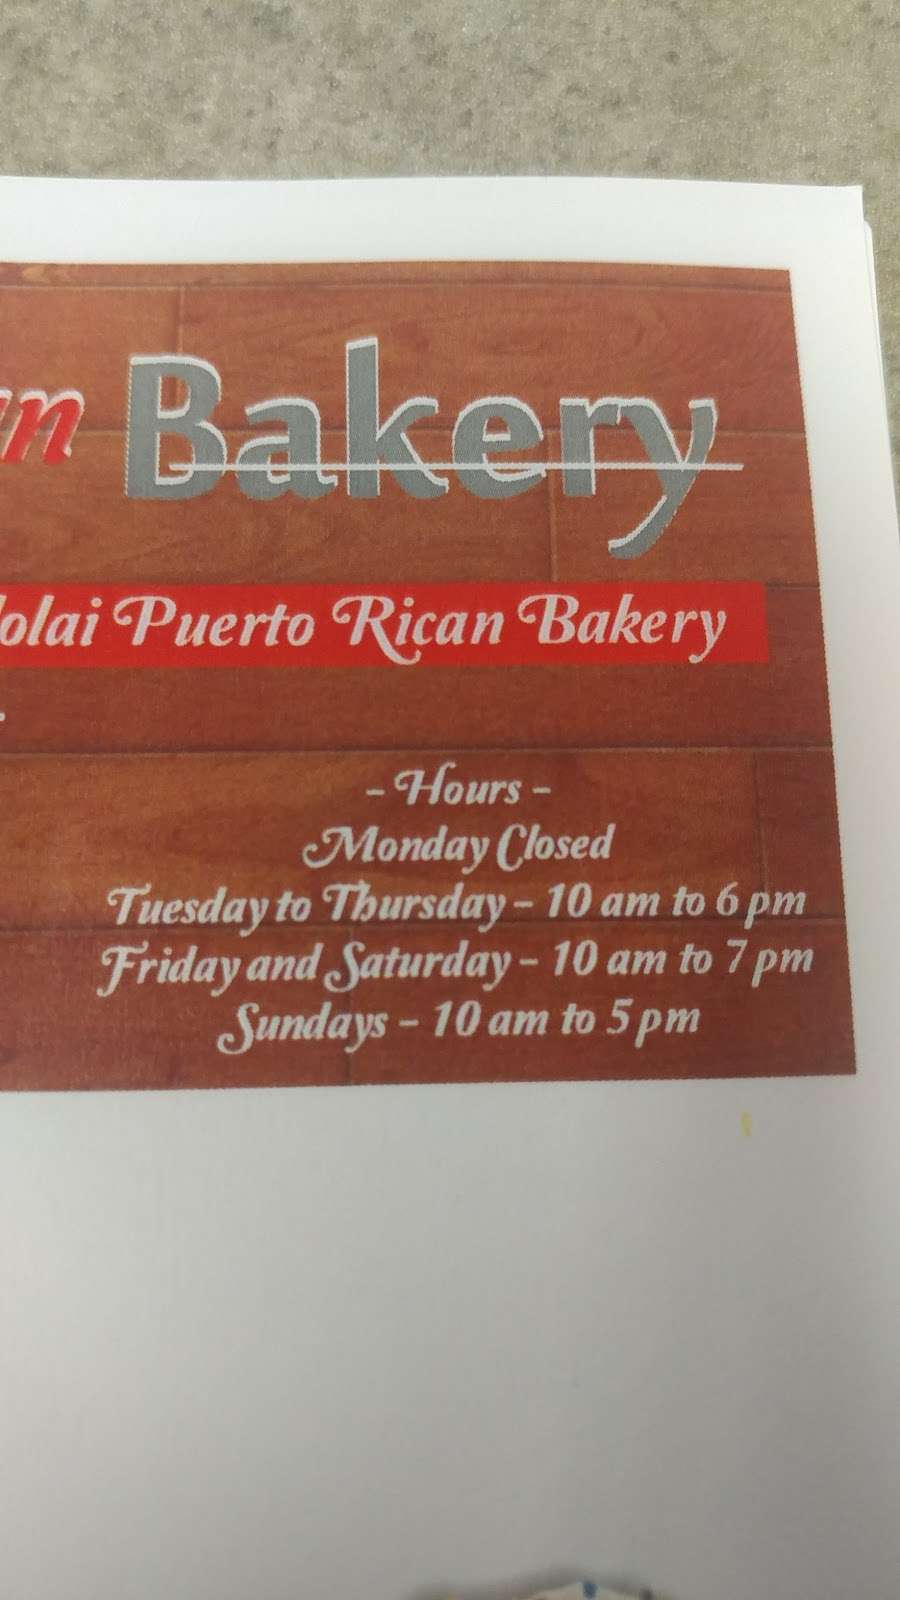 Le lo lai puerto rican bakery | 1460 Brownsville Rd, Feasterville-Trevose, PA 19053 | Phone: (215) 357-1845